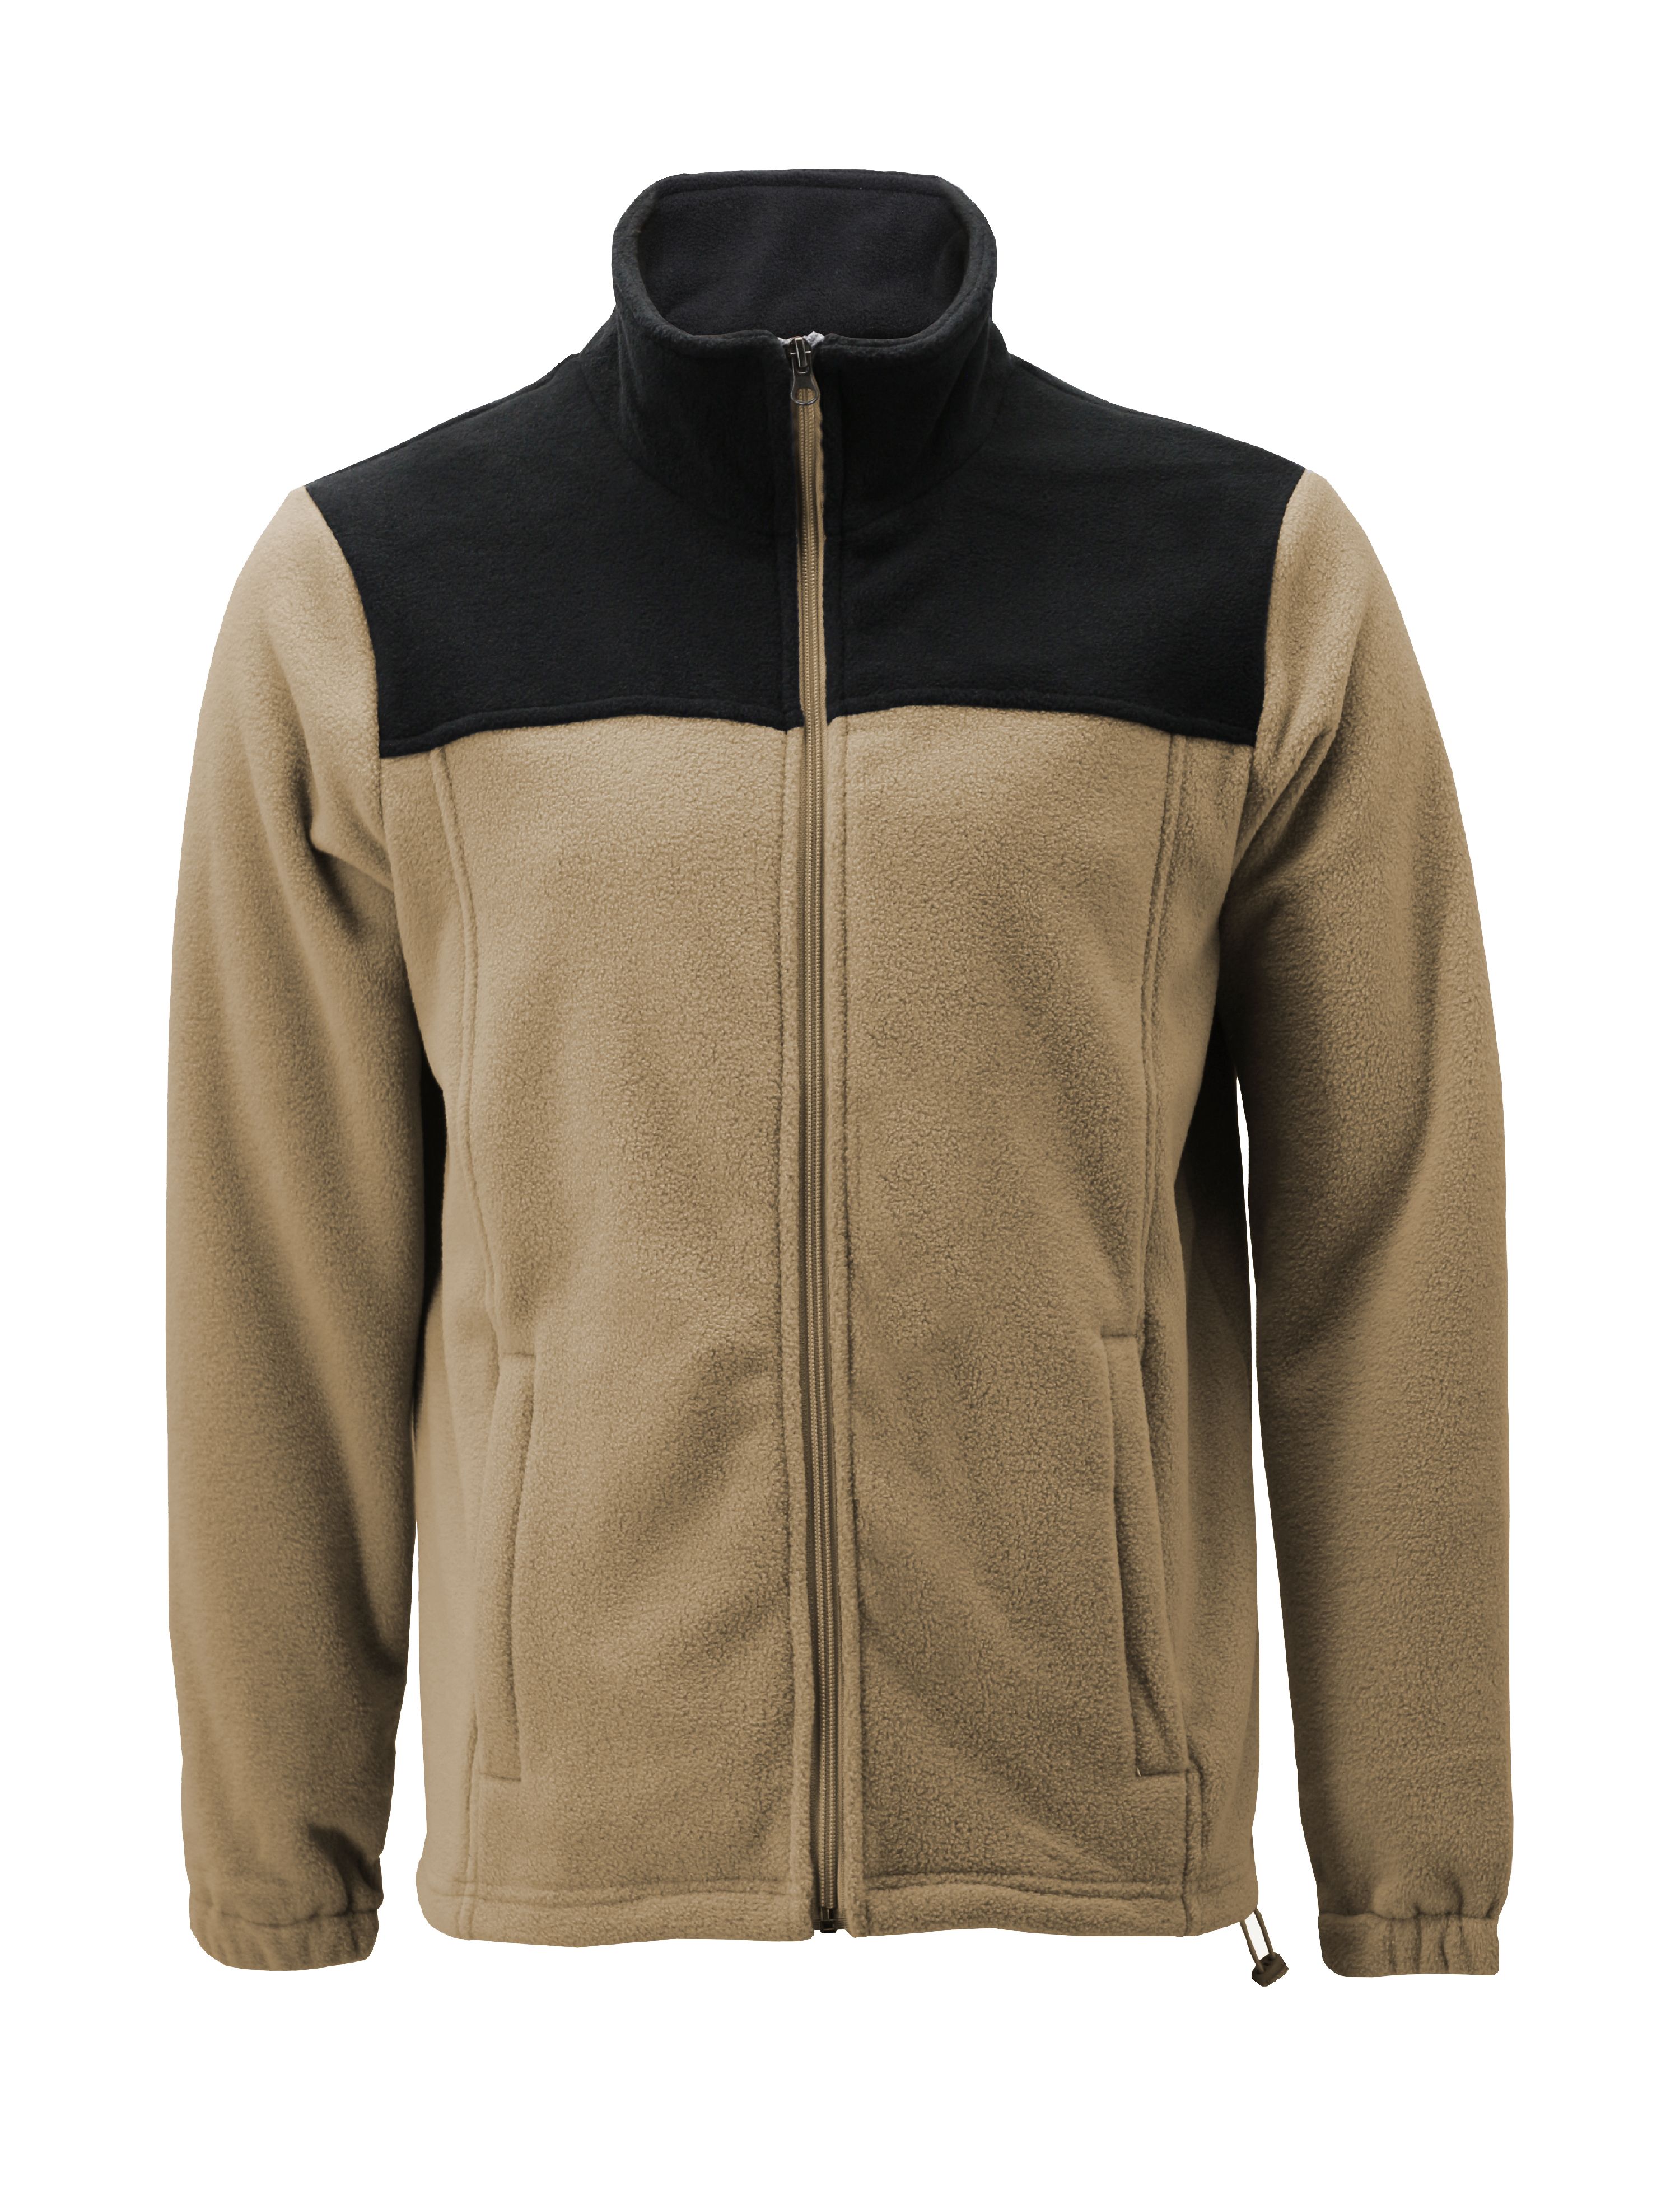 Men's Full Zip-Up Two Tone Solid Warm Polar Fleece Soft Collared Sweater Jacket (XL, LF35 #2) - image 1 of 3